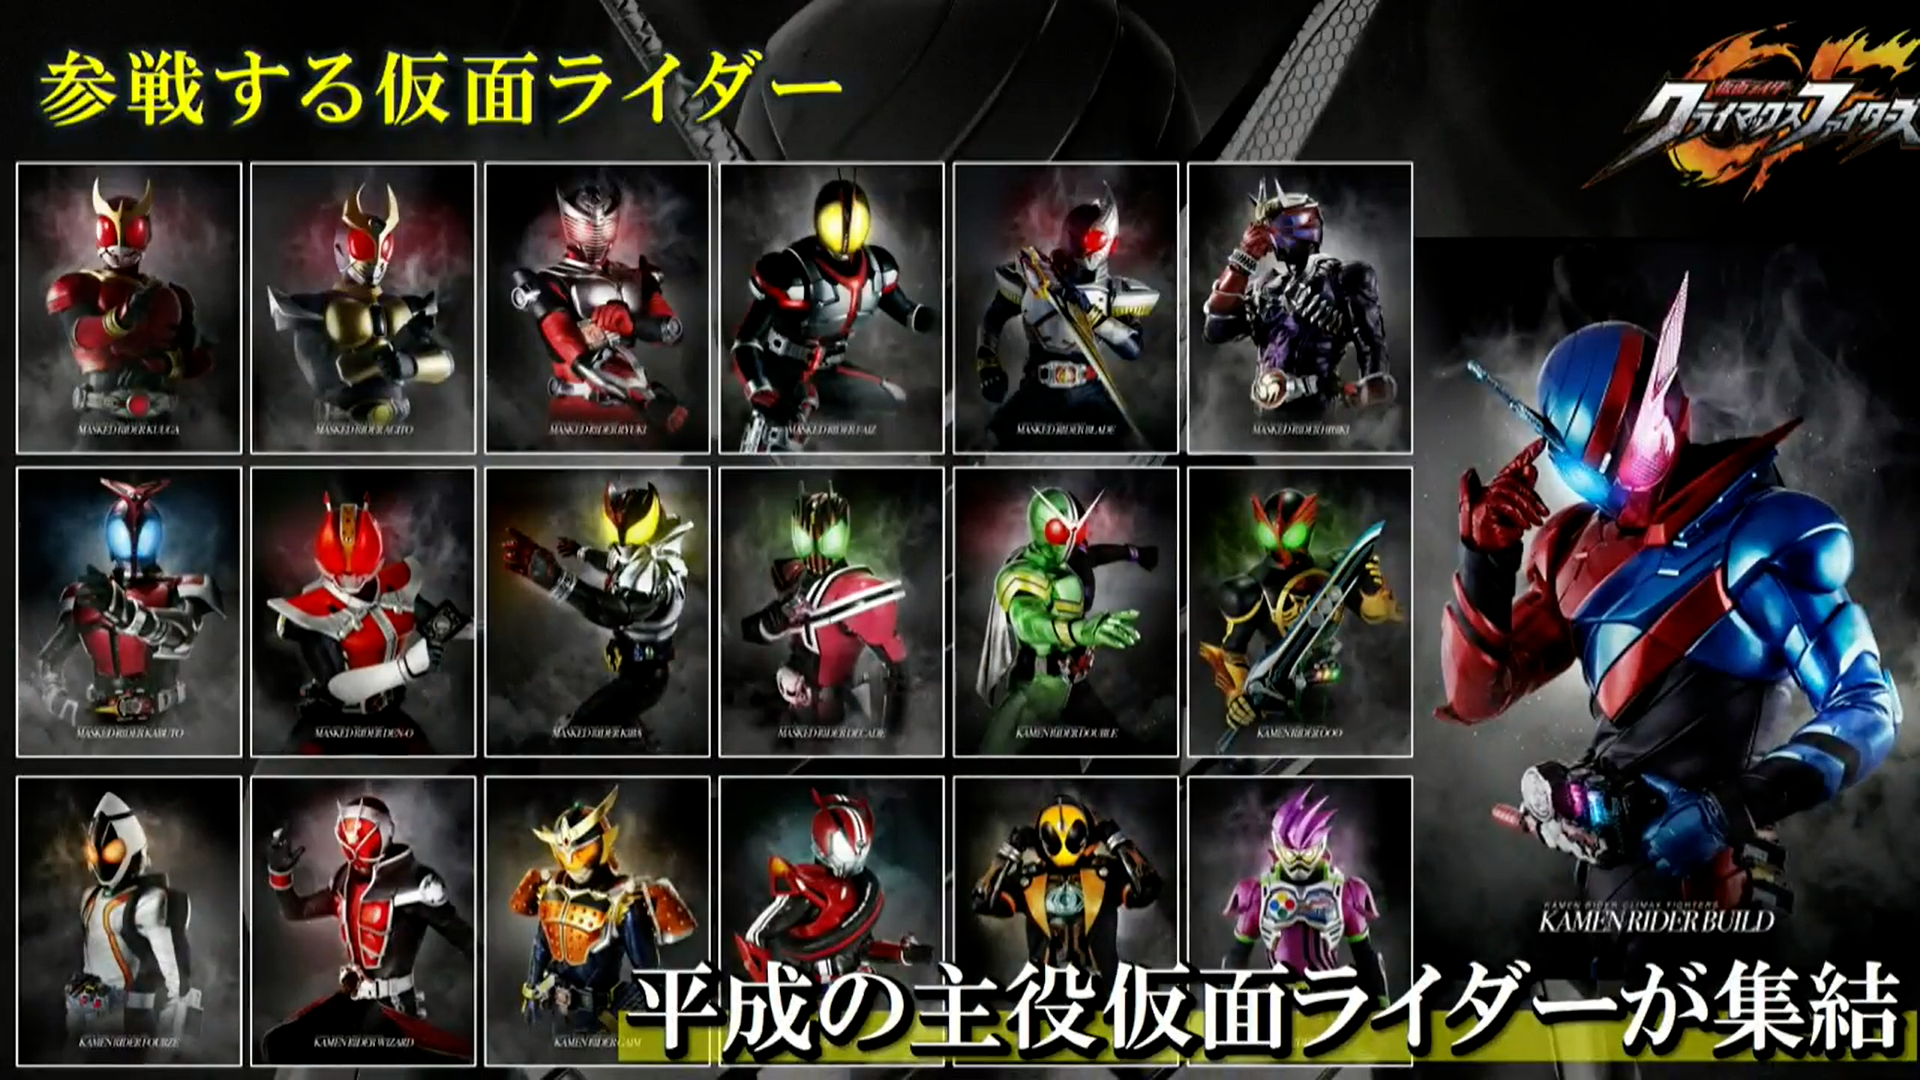 Kamen Rider Climax Fighters roster